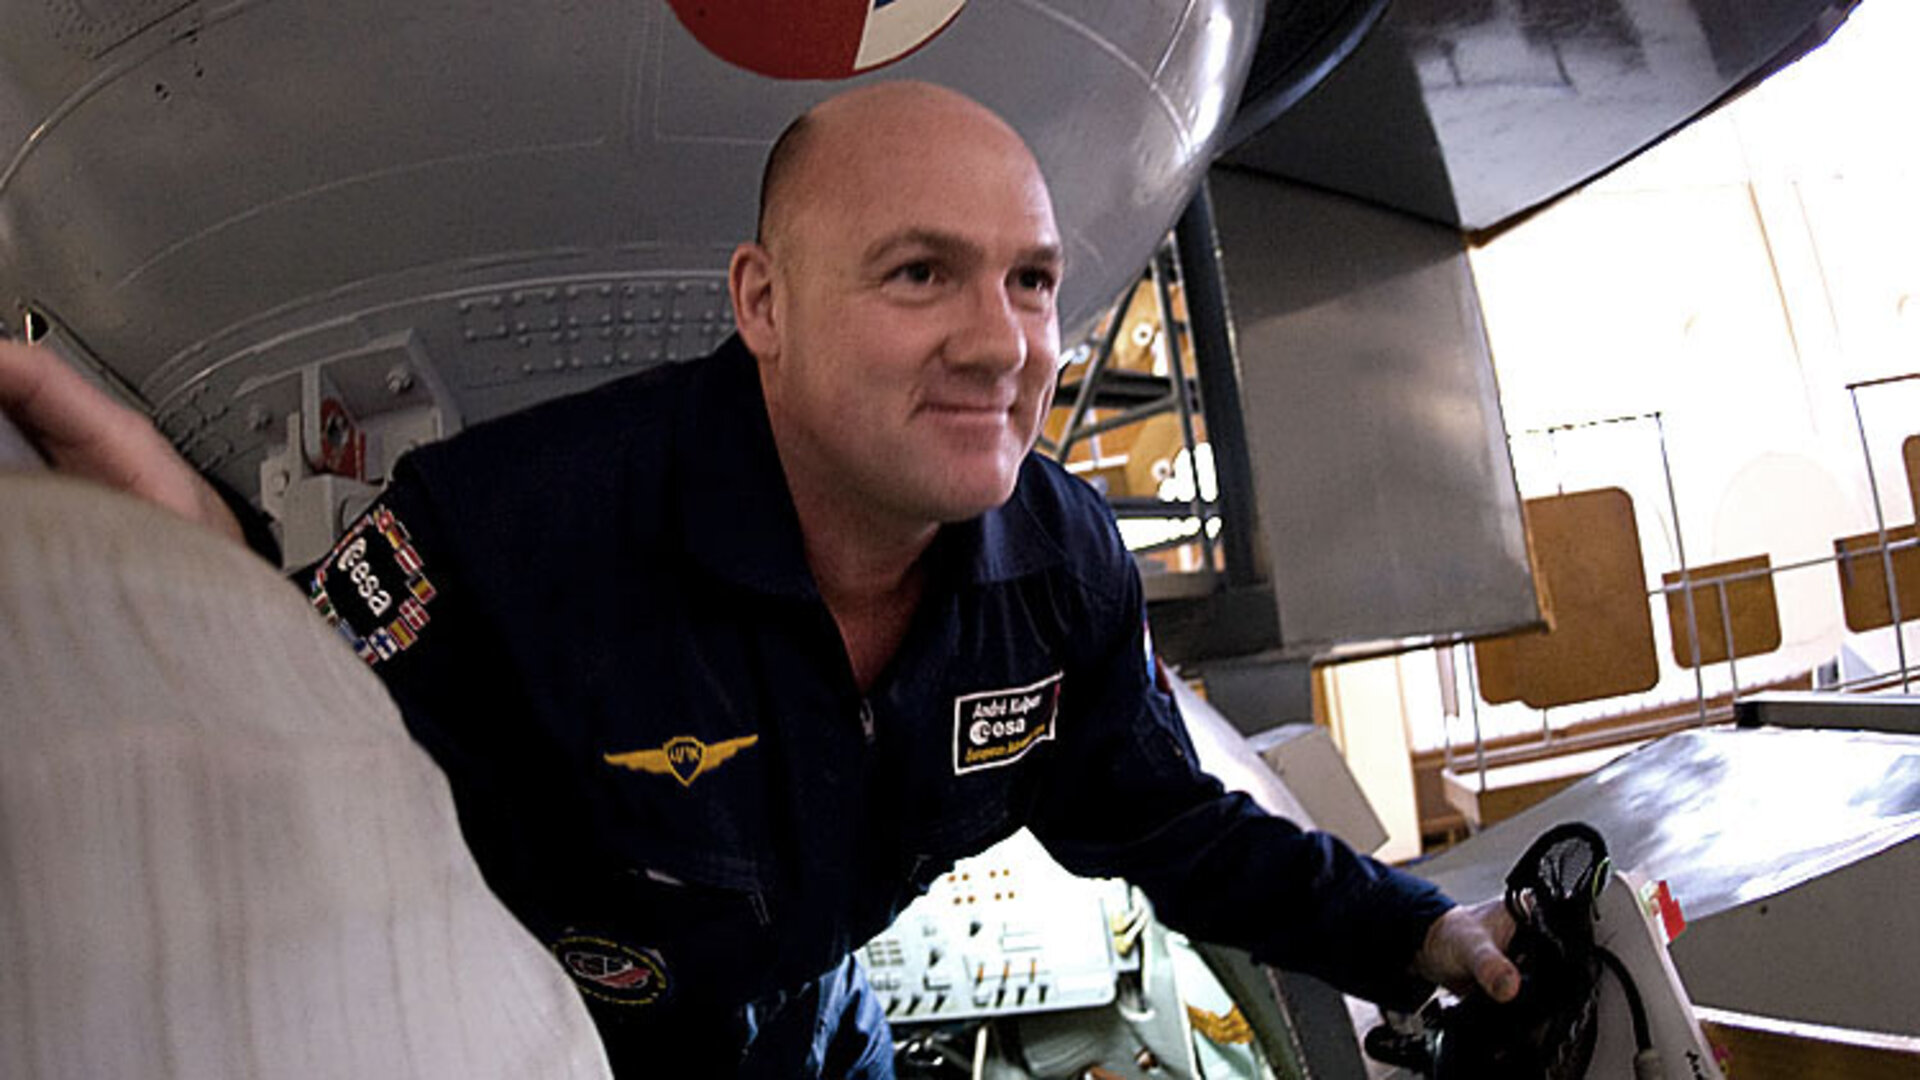 André Kuipers climbs out of the Soyuz simulator at Star City